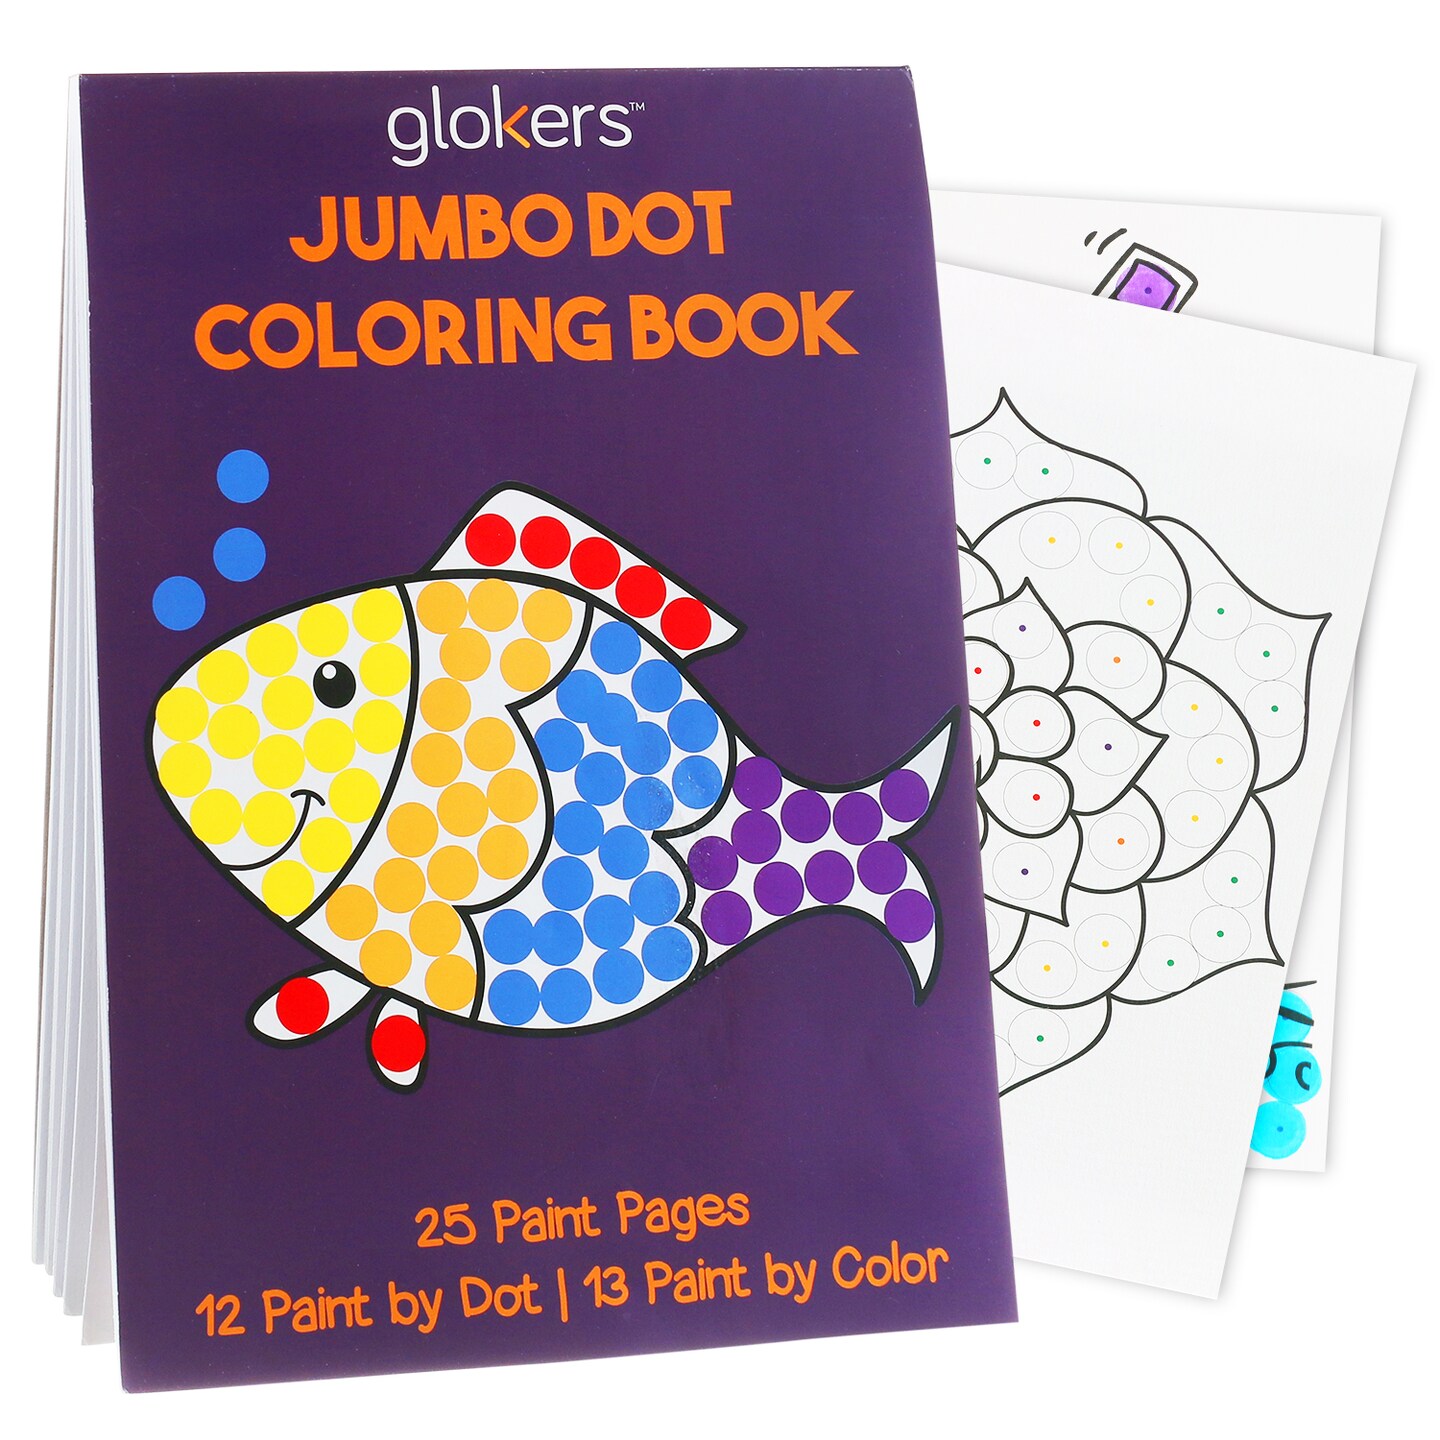 Dot Markers Activity Book  A Dot Art Coloring Book for Toddlers